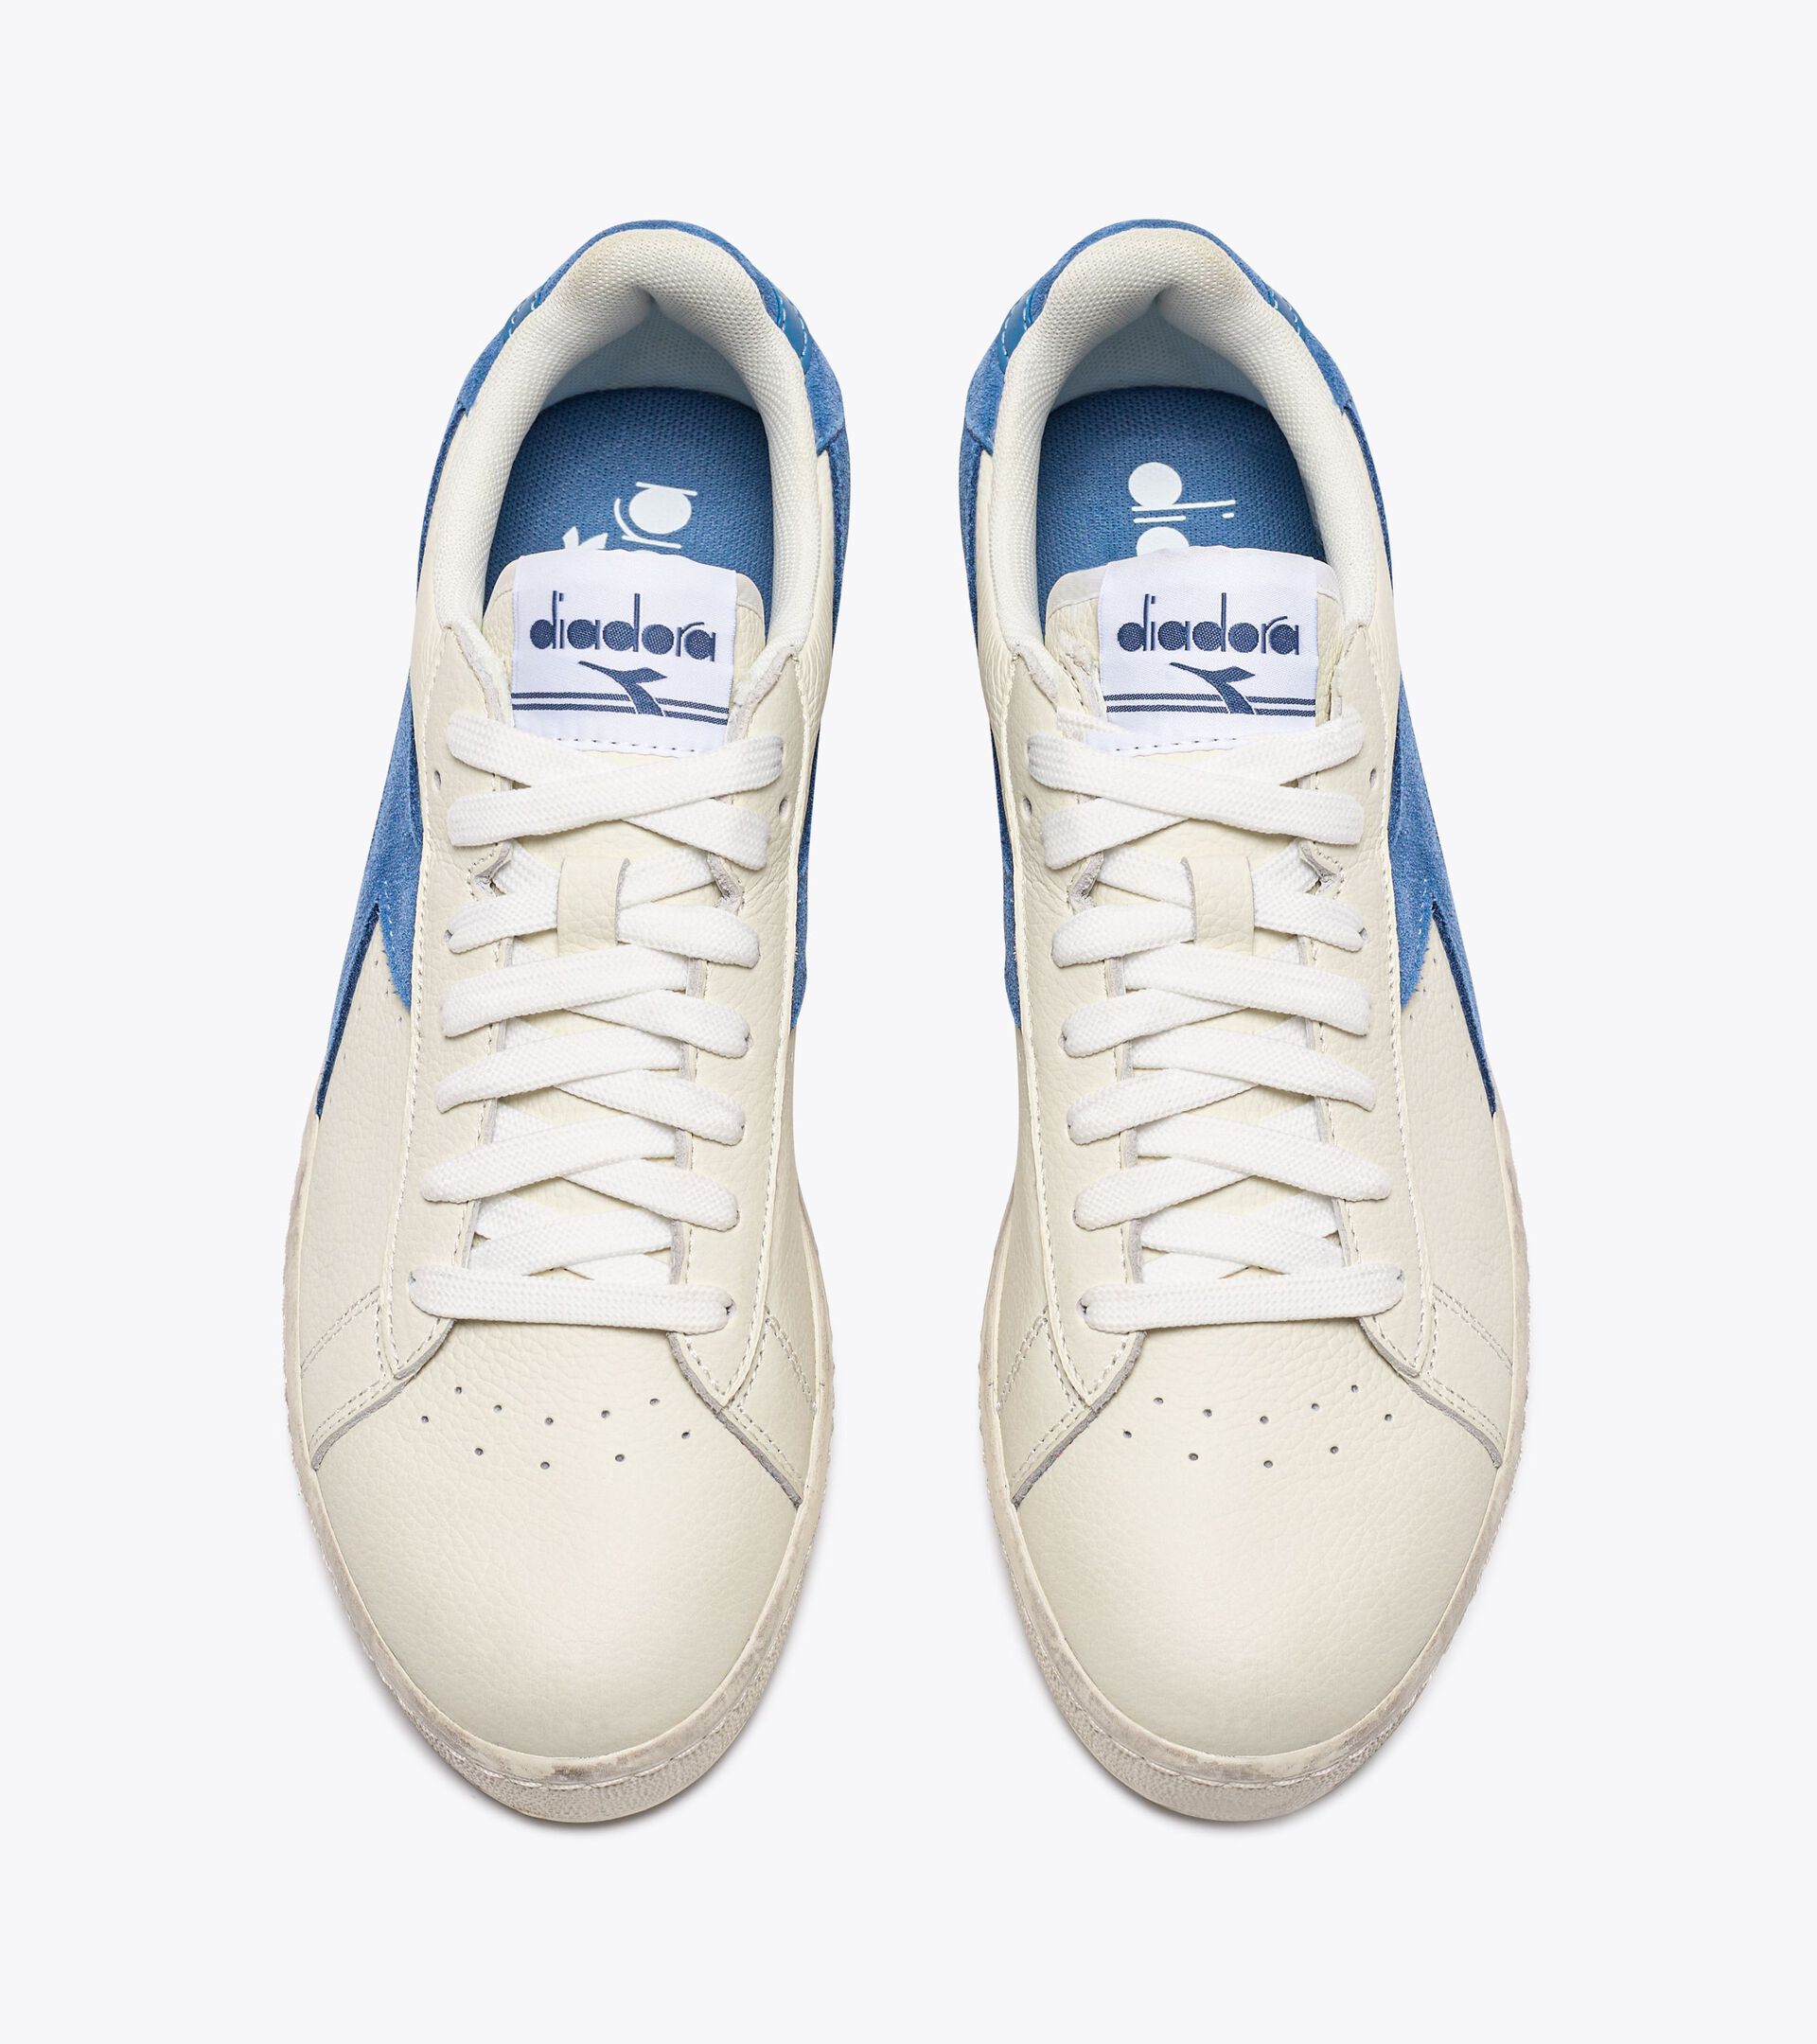 Sporty sneakers - Gender neutral GAME L LOW WAXED SUEDE POP WHITE/BLUE BLEACHED DENIM - Diadora